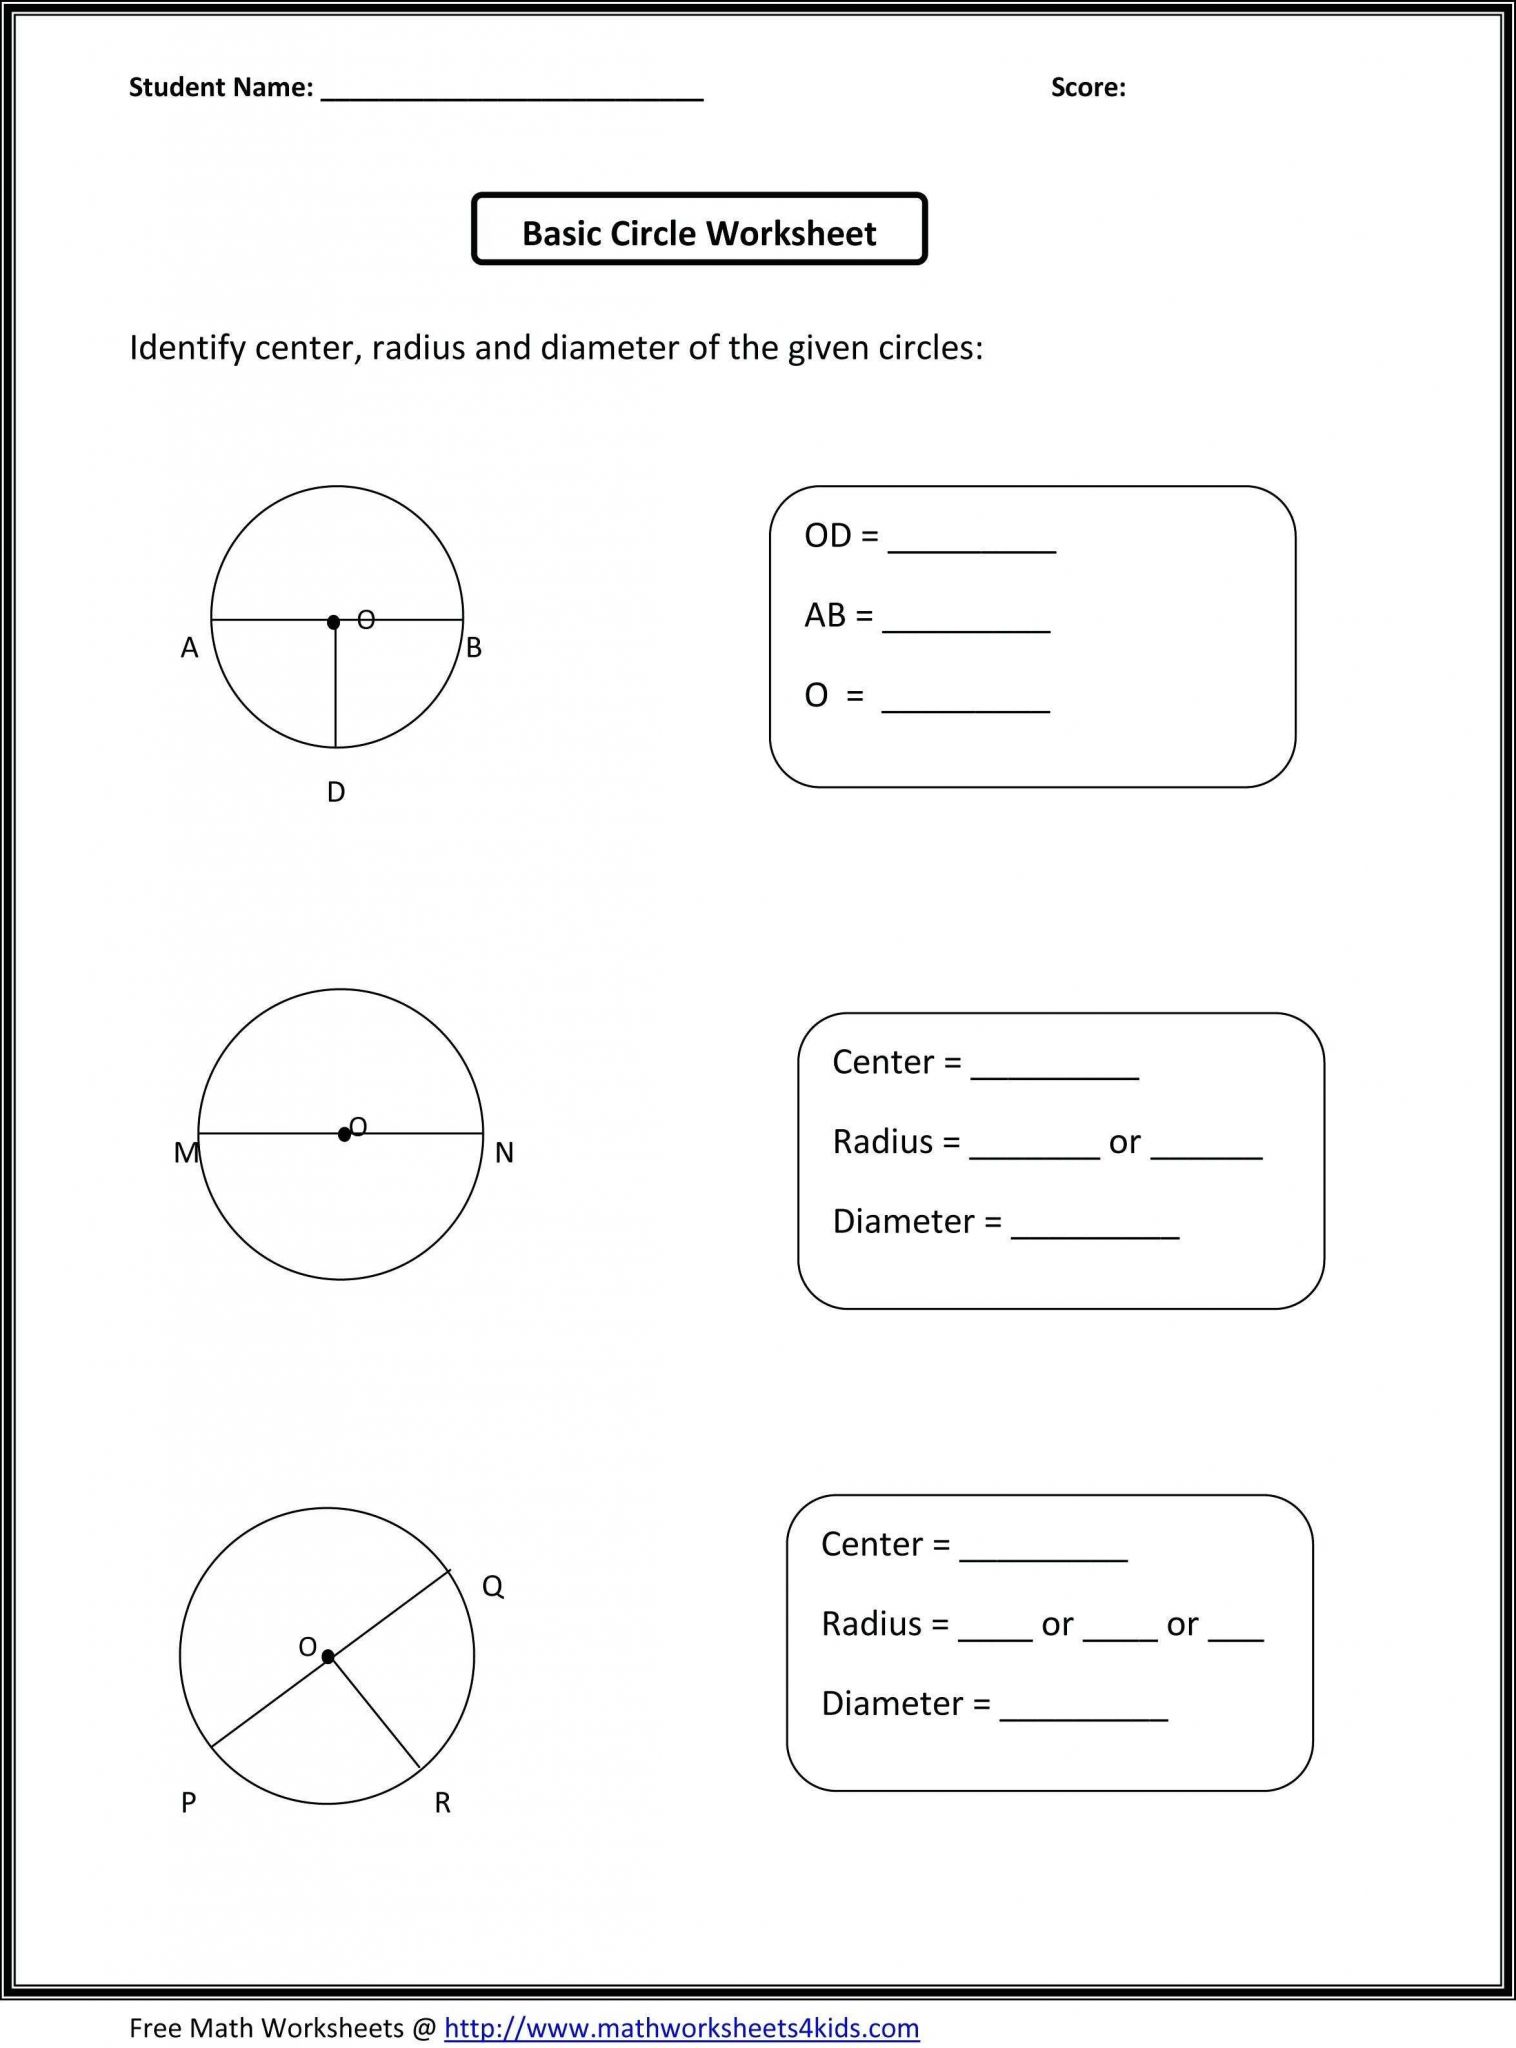 Dna Replication Coloring Worksheet Answer Key as Well as with Cell Membrane Coloring Worksheet Coloring Pages Answers